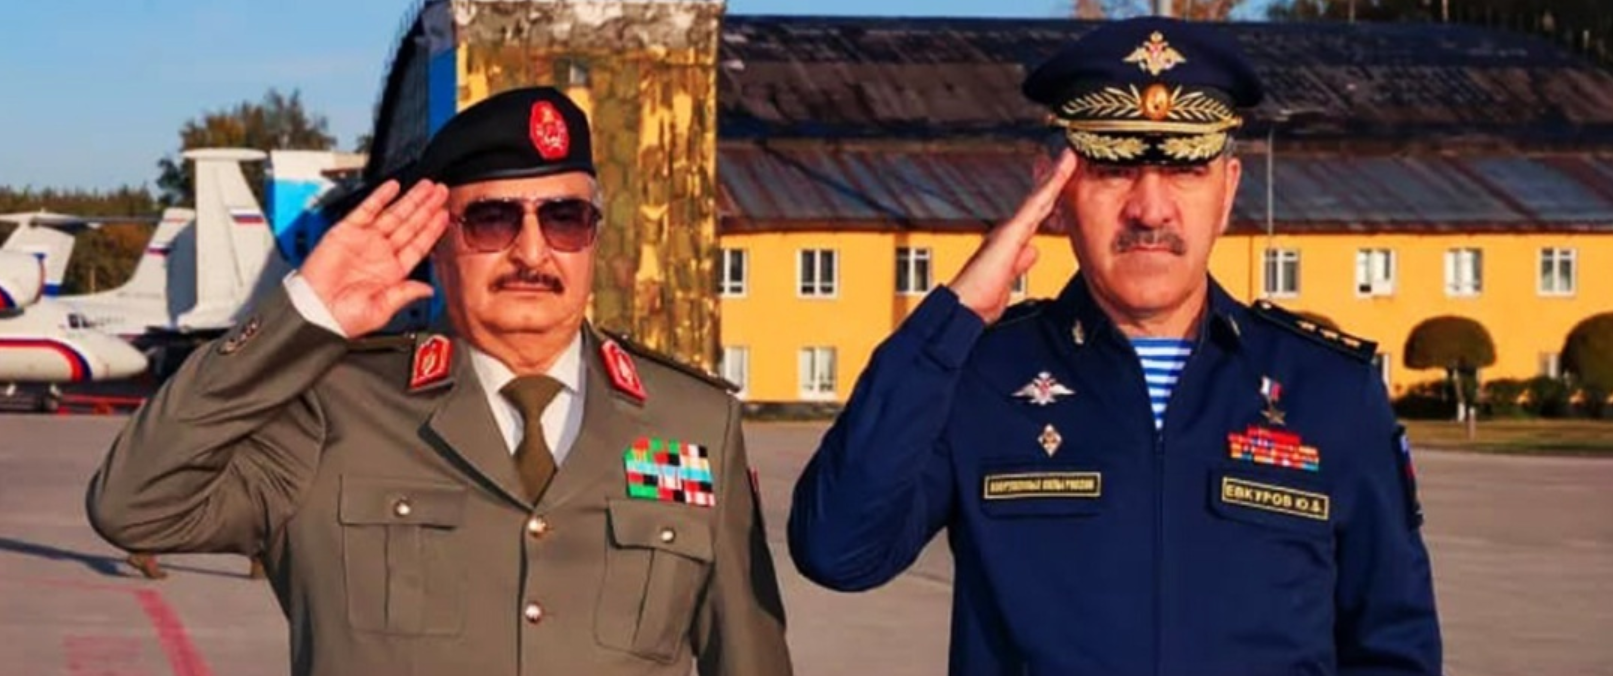 Haftar meets with Russian Deputy Defense Minister in Benghazi